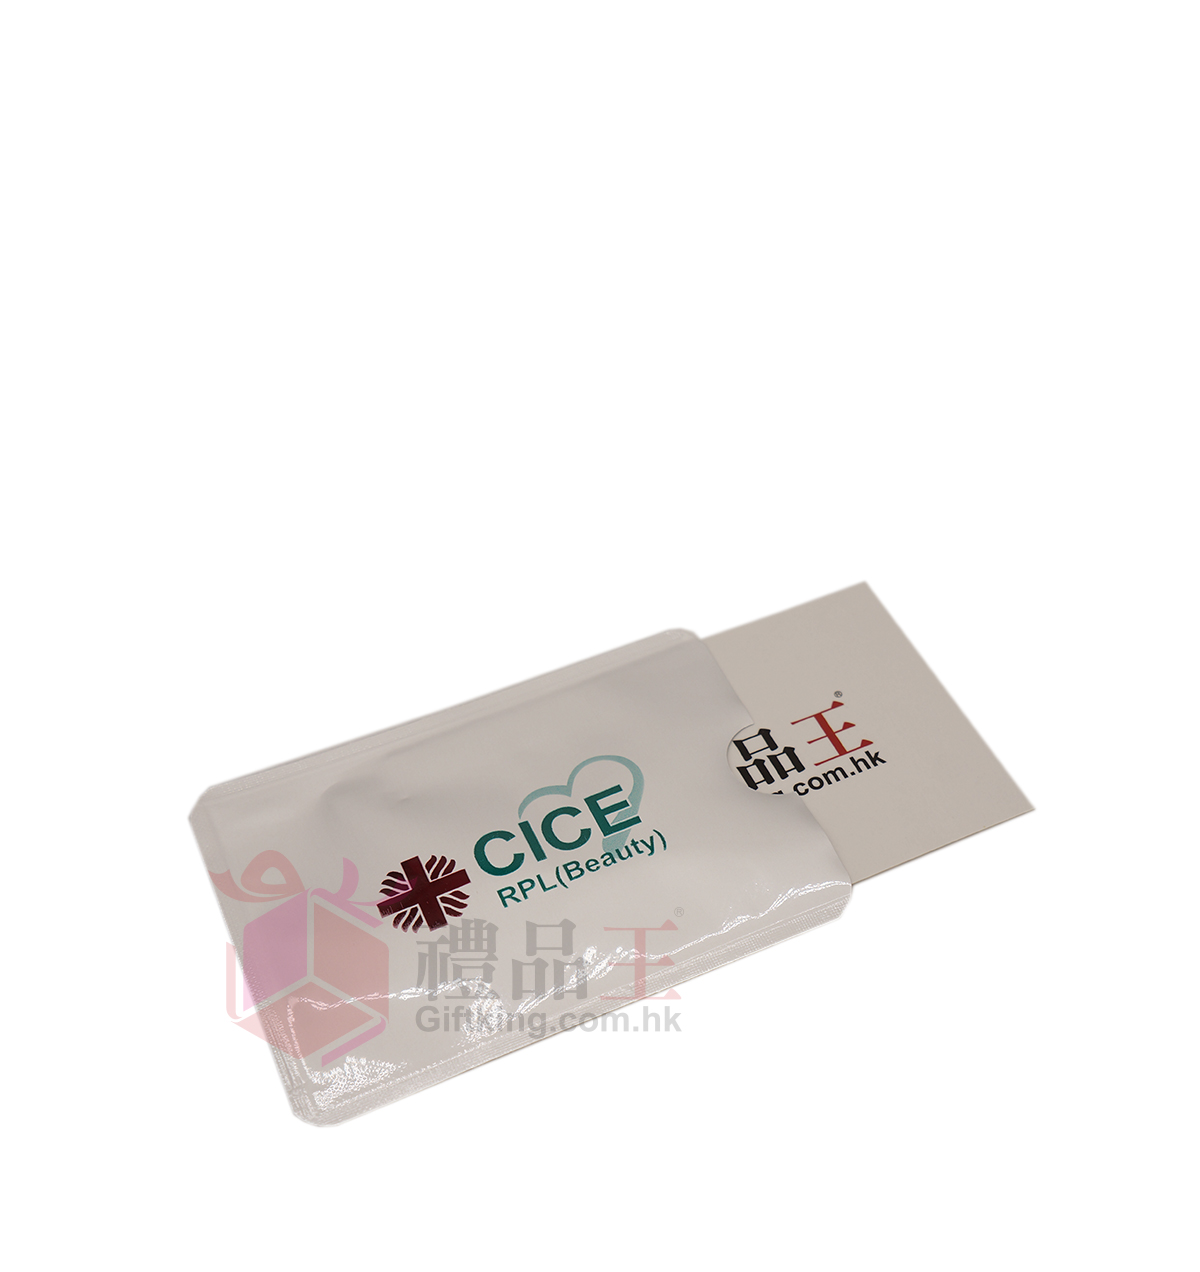 CICE RFID Barrier Data Leakage Protection Cover (Advertising Gift)